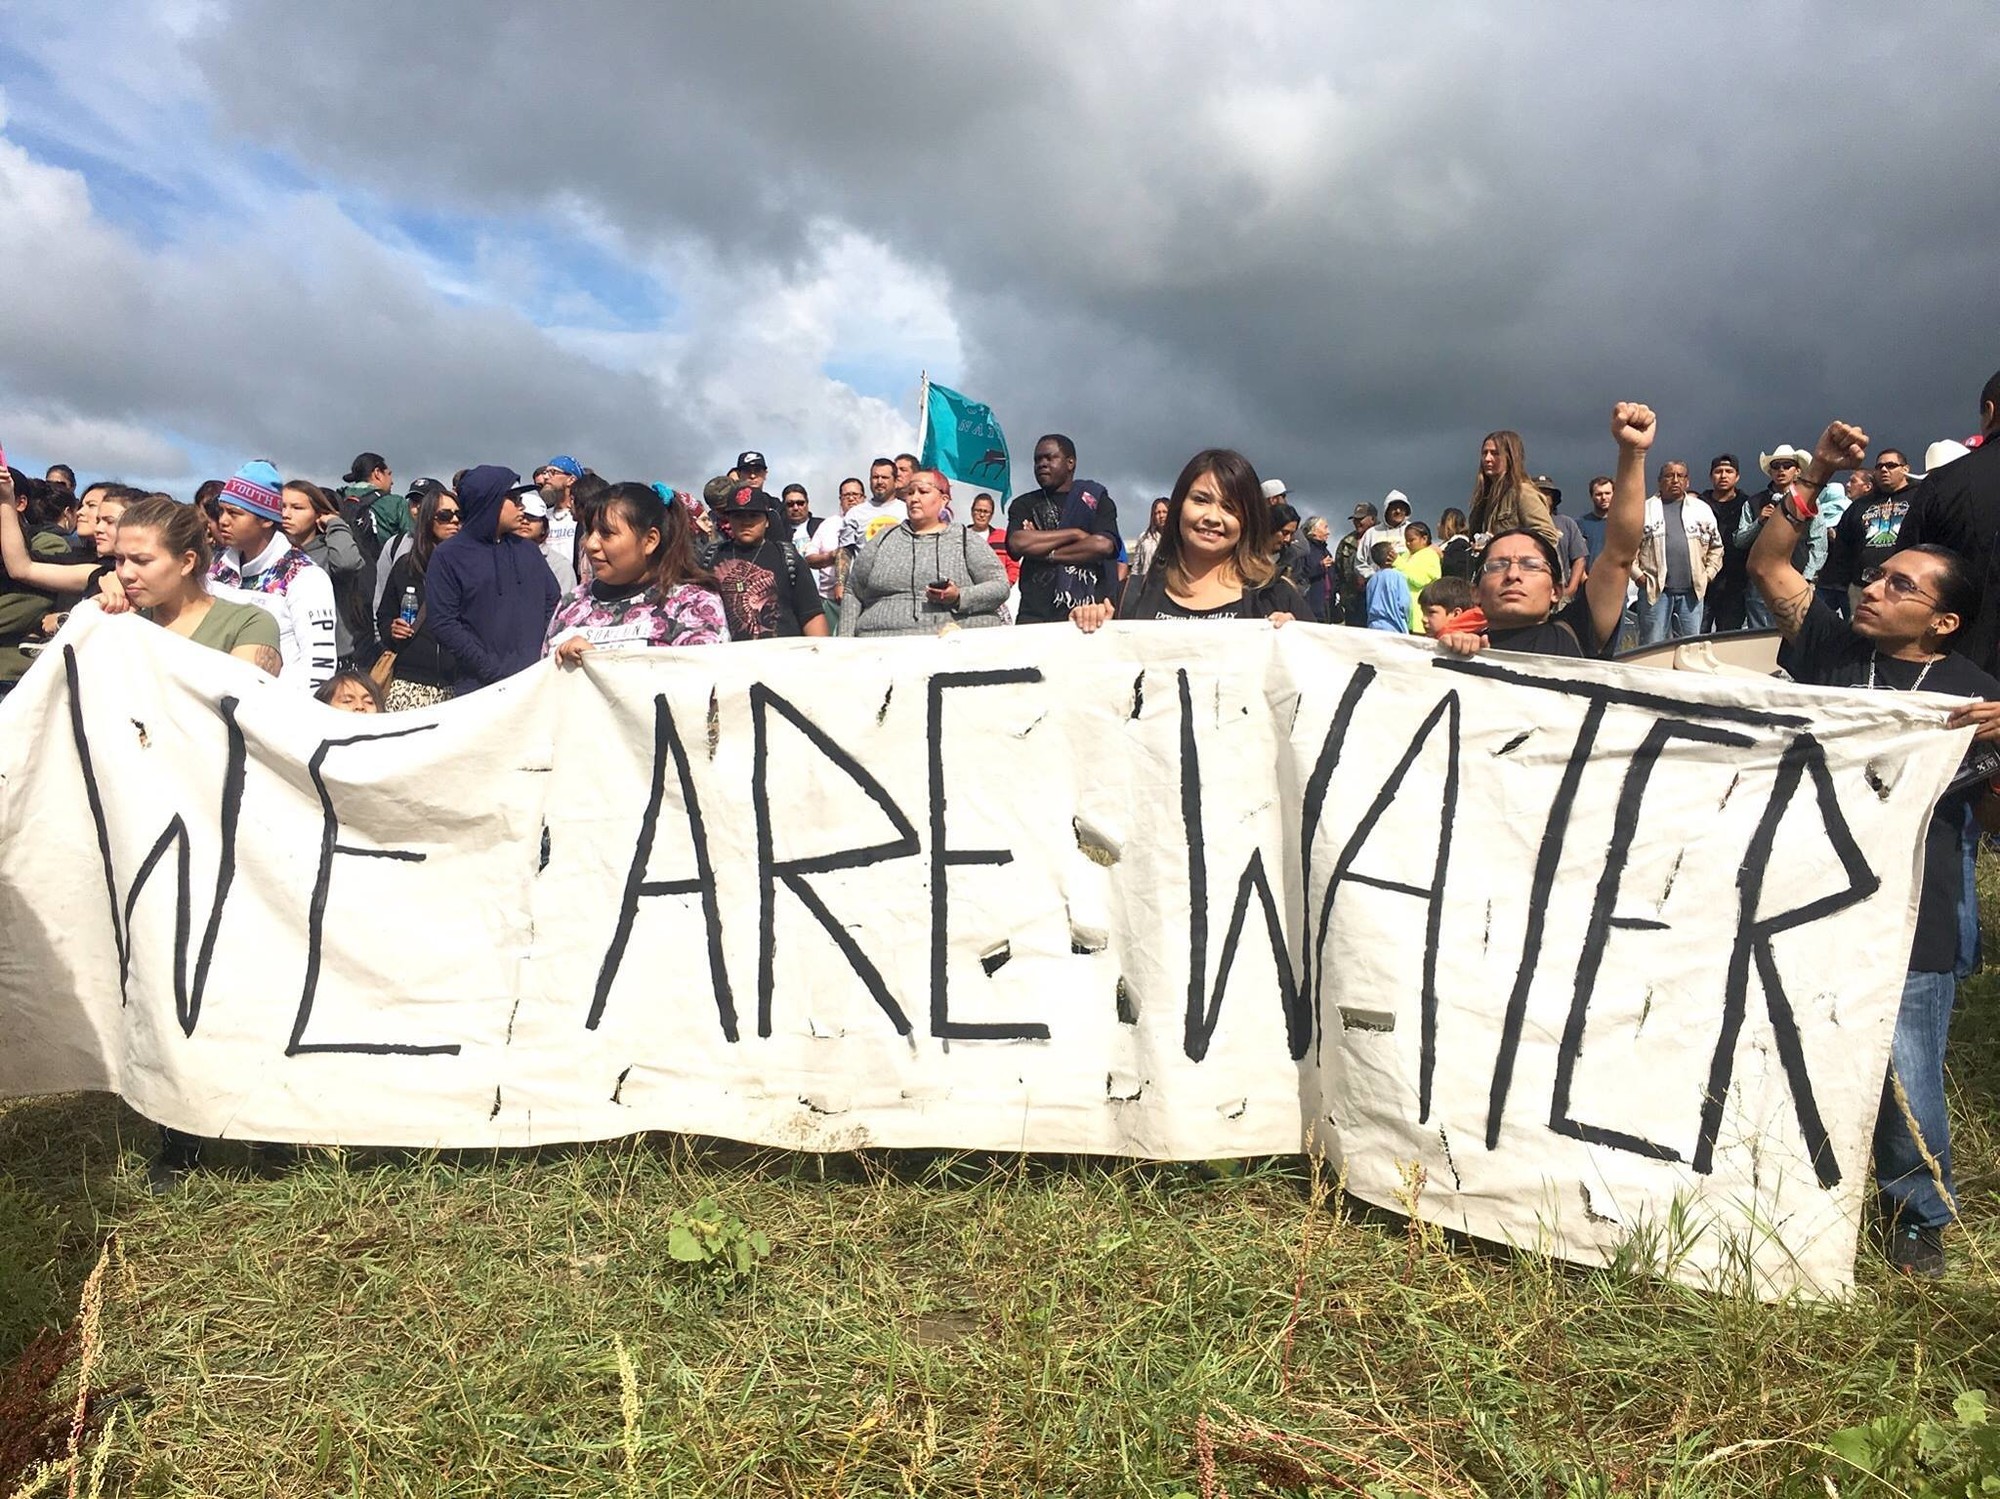 A large group of Alaskans hold a "WE ARE WATER" banner as part of a Stand With Standing Rock #NoDAPL protest in 2016